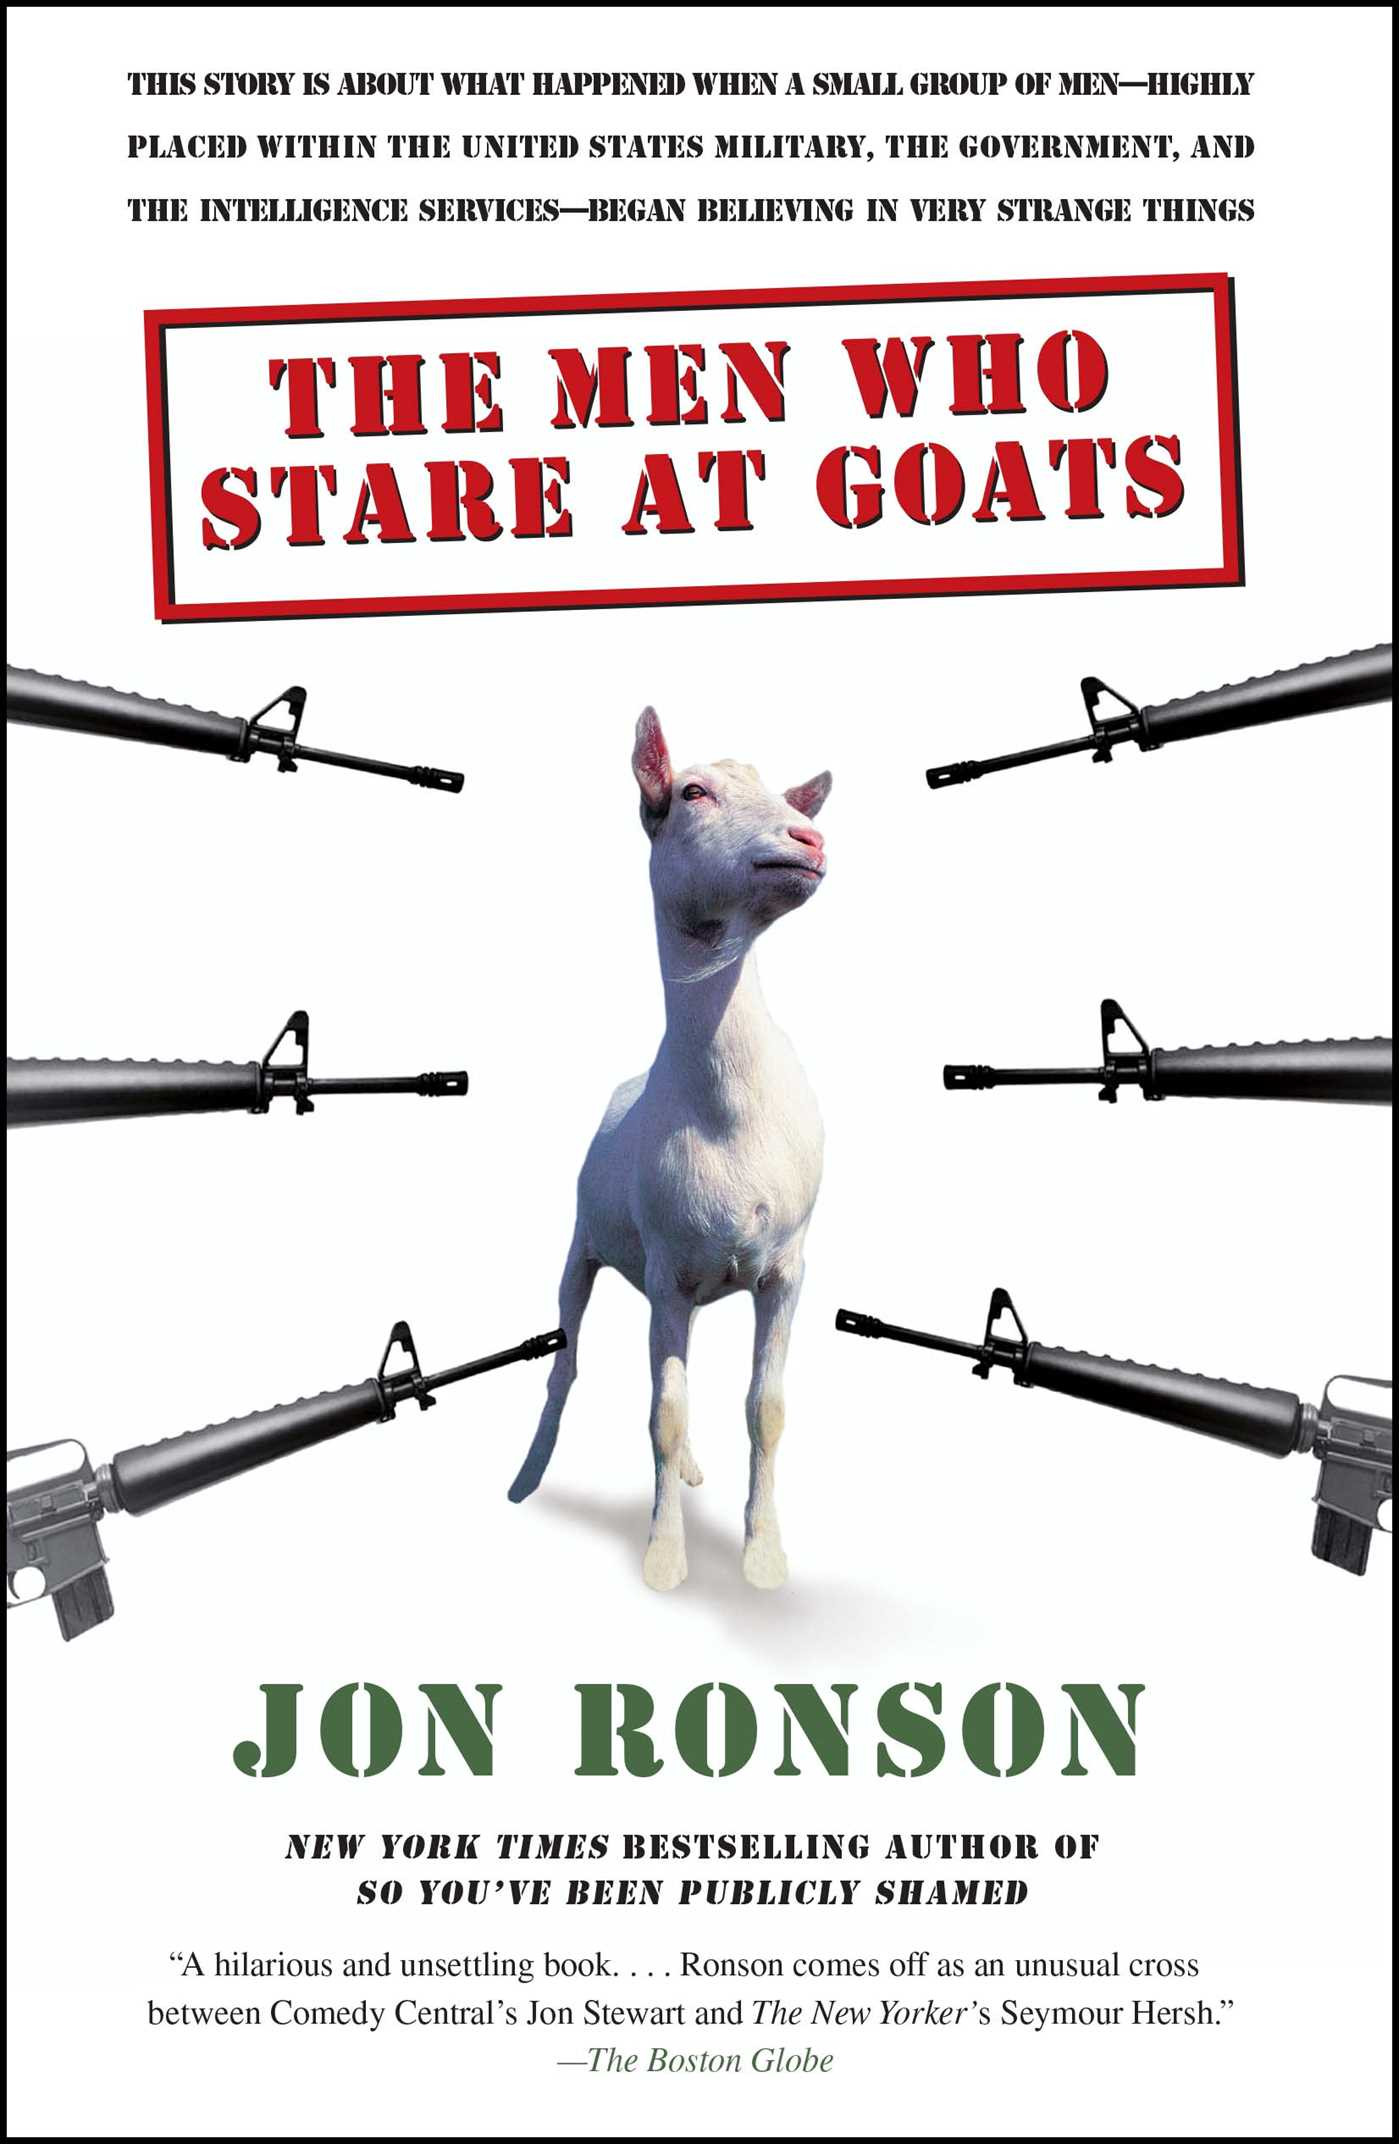 Cover of 'The Men Who Stare at Goats' by Jon Ronson.